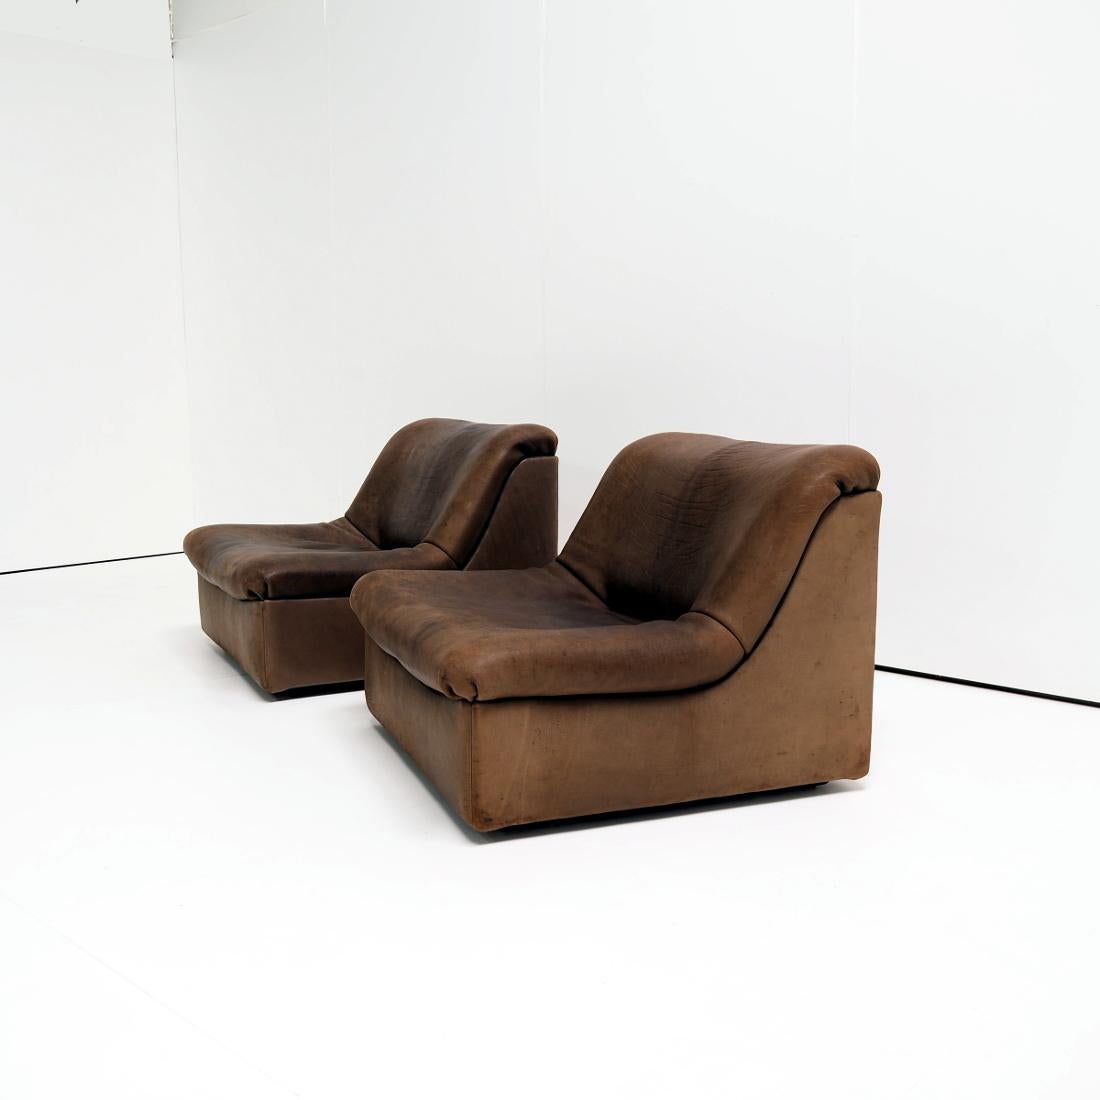 Two leather DS46 seats by De Sede Switzerland. The DS46 has very thick buffalo leather which makes them last a lifetime.

The chairs are in good vintage condition with a strong patina consistend with age and use. Quite funky.

Designed in the